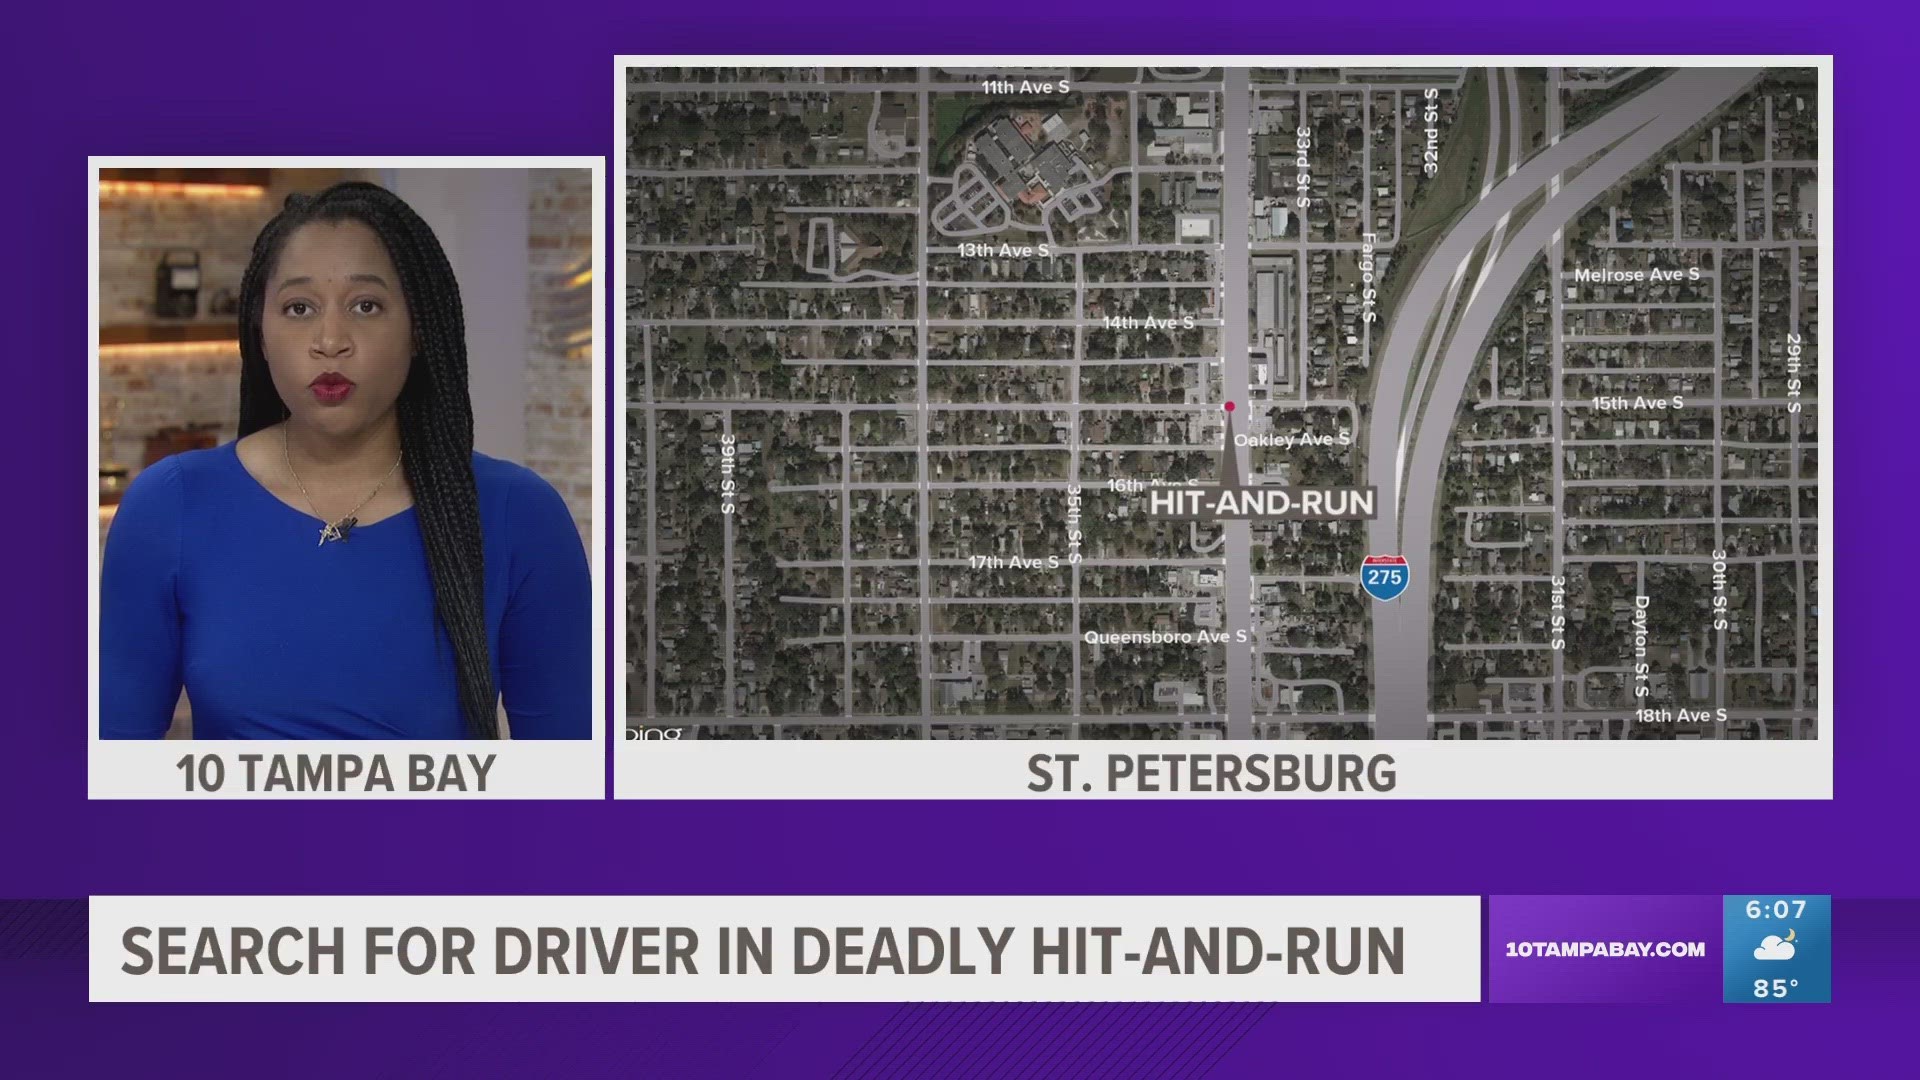 Cassandra Gelineau was struck by an SUV while crossing an intersection in St. Petersburg, police said.